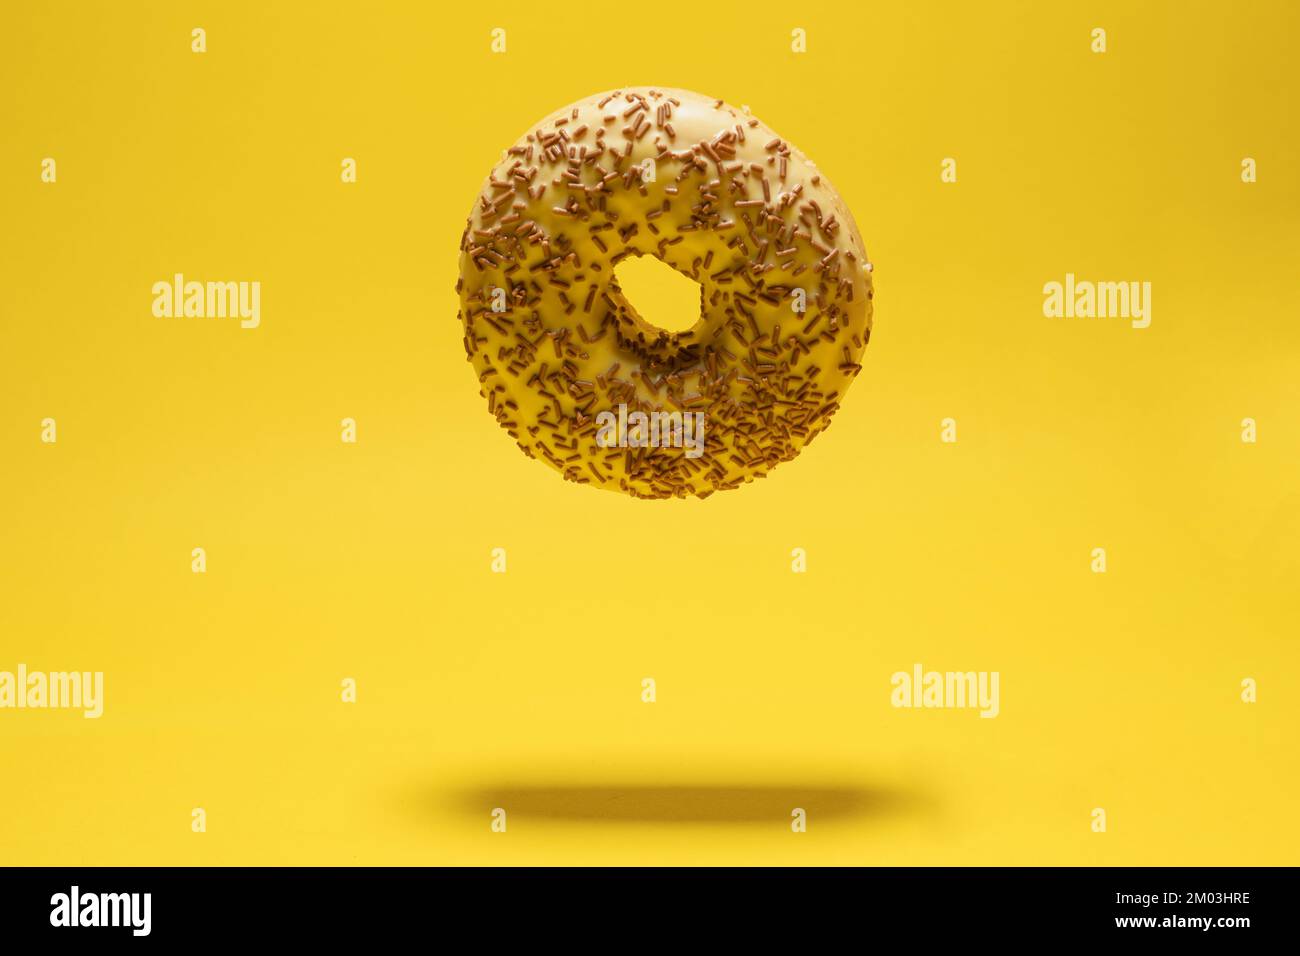 Levitating yellow donut on a yellow background. Creative sweet concept Stock Photo